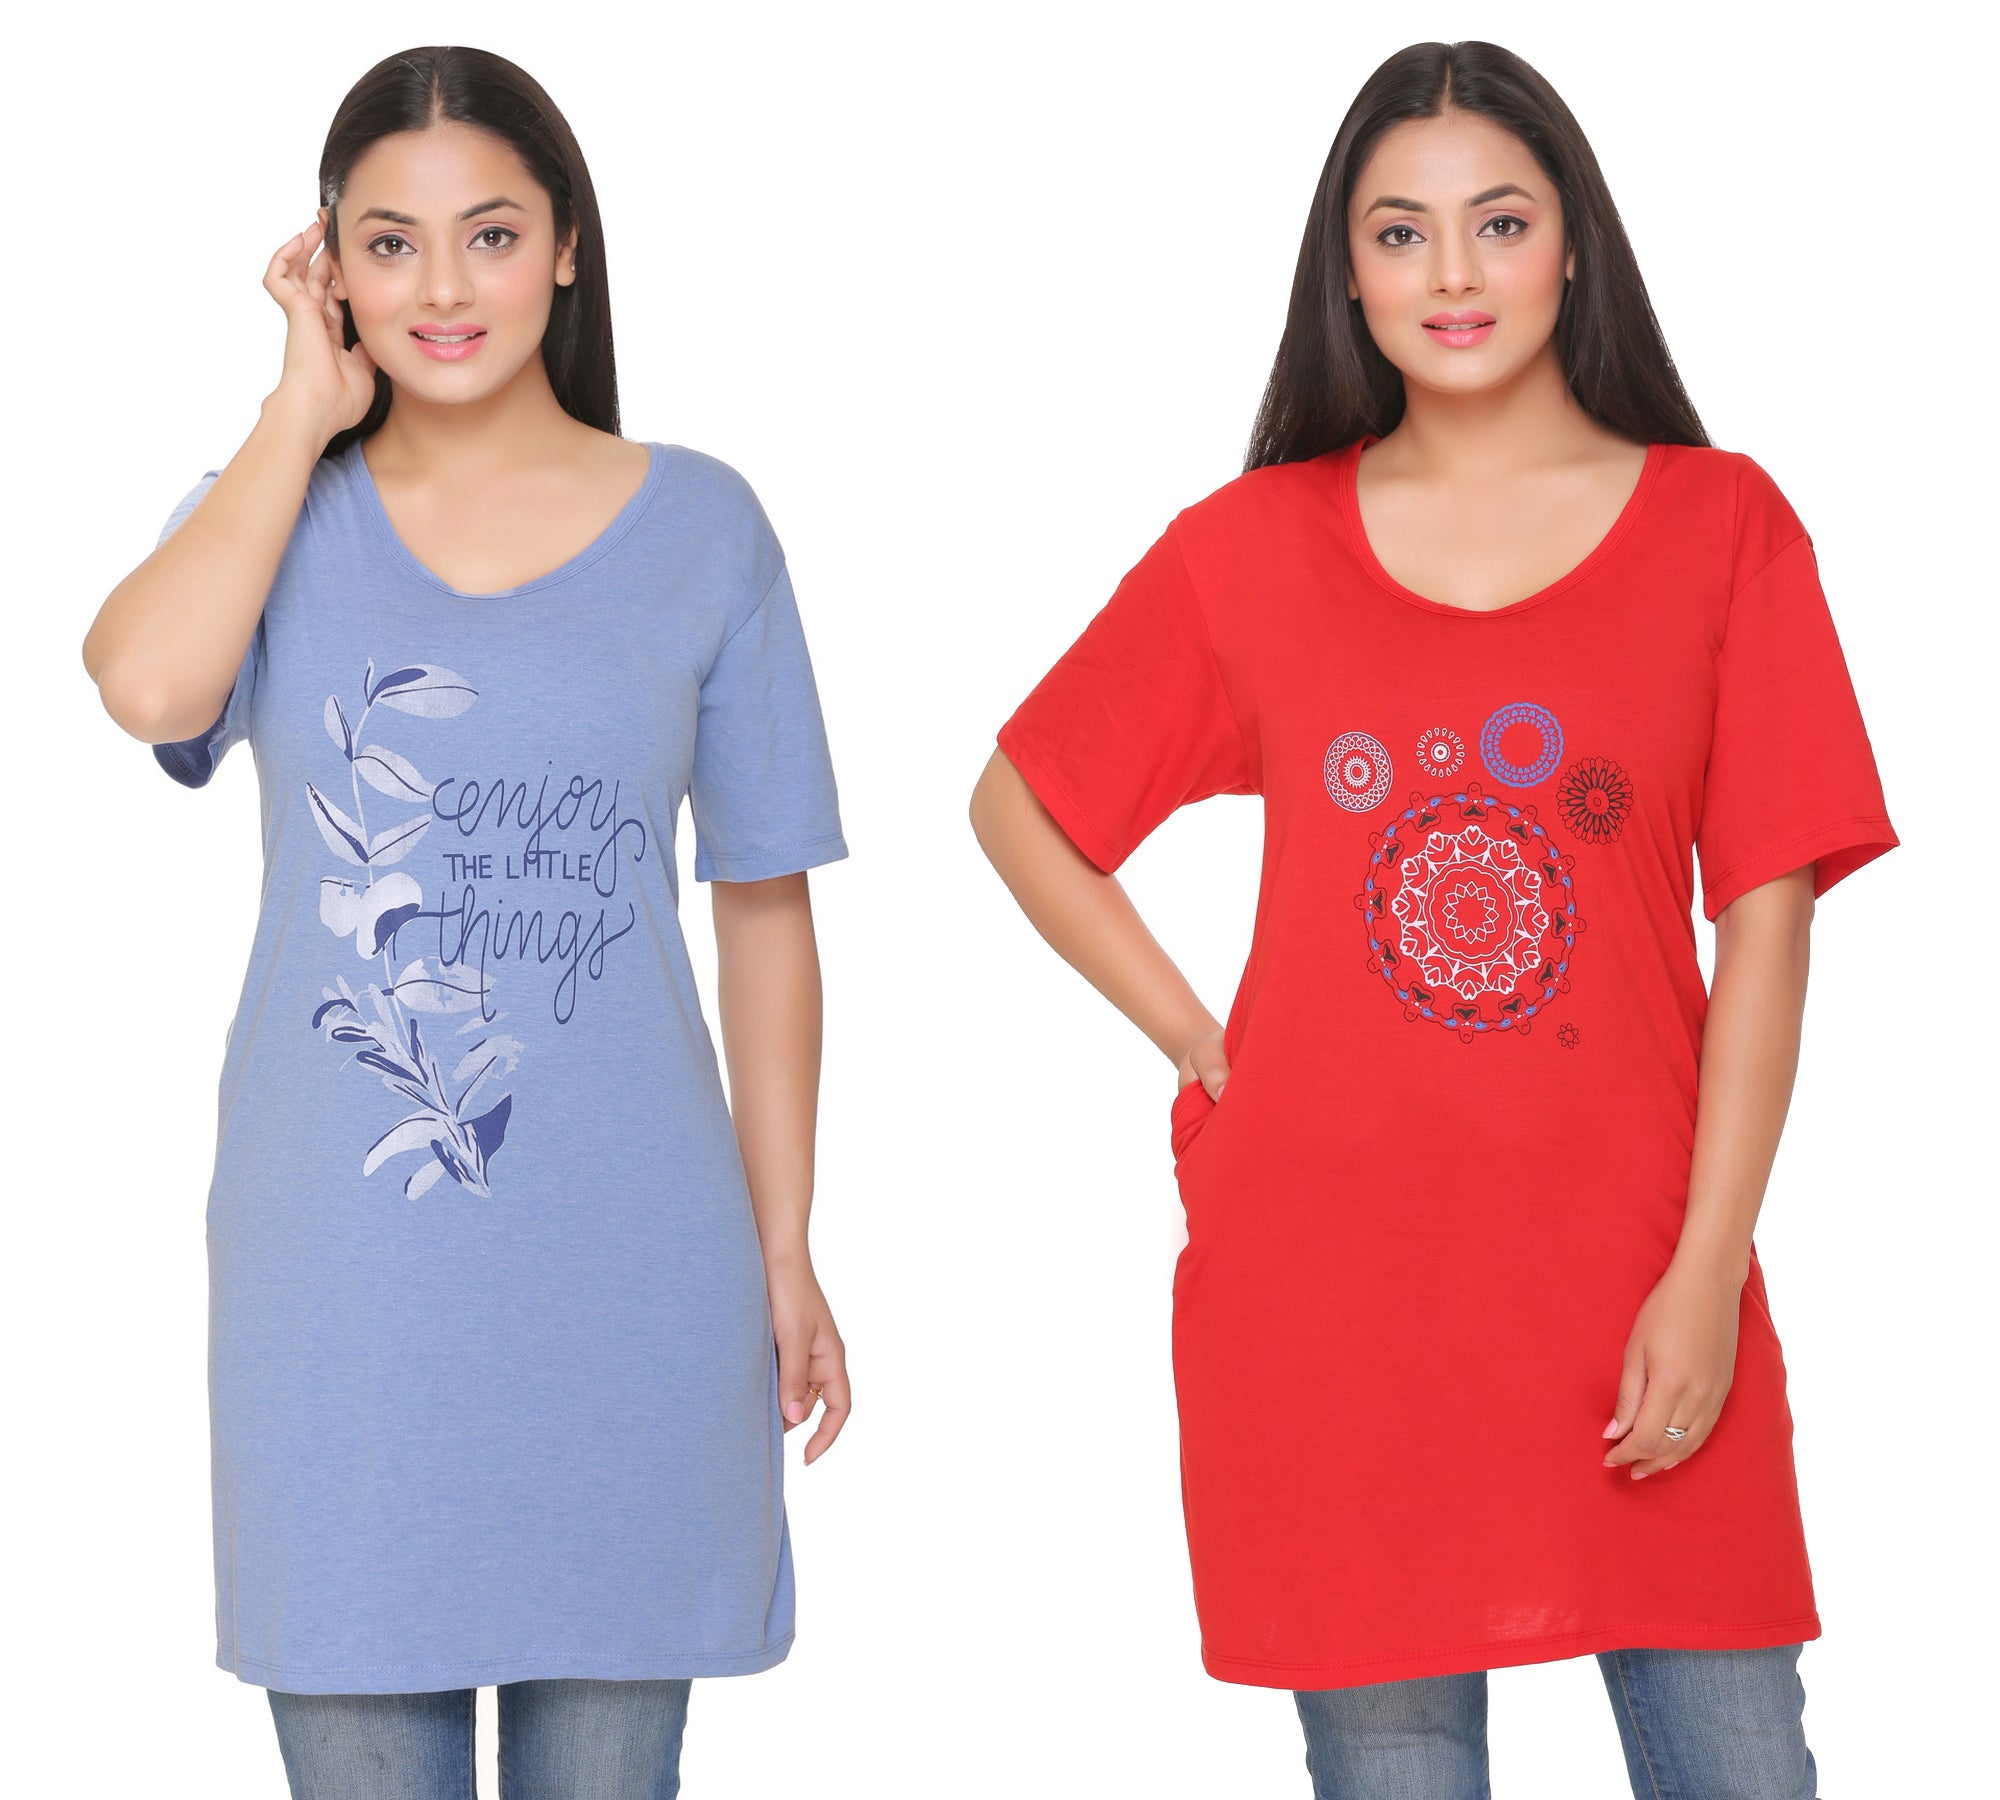 Plus Size Long T-shirts For Women - Half Sleeve - Pack of 2 (Sky Blue & Red)